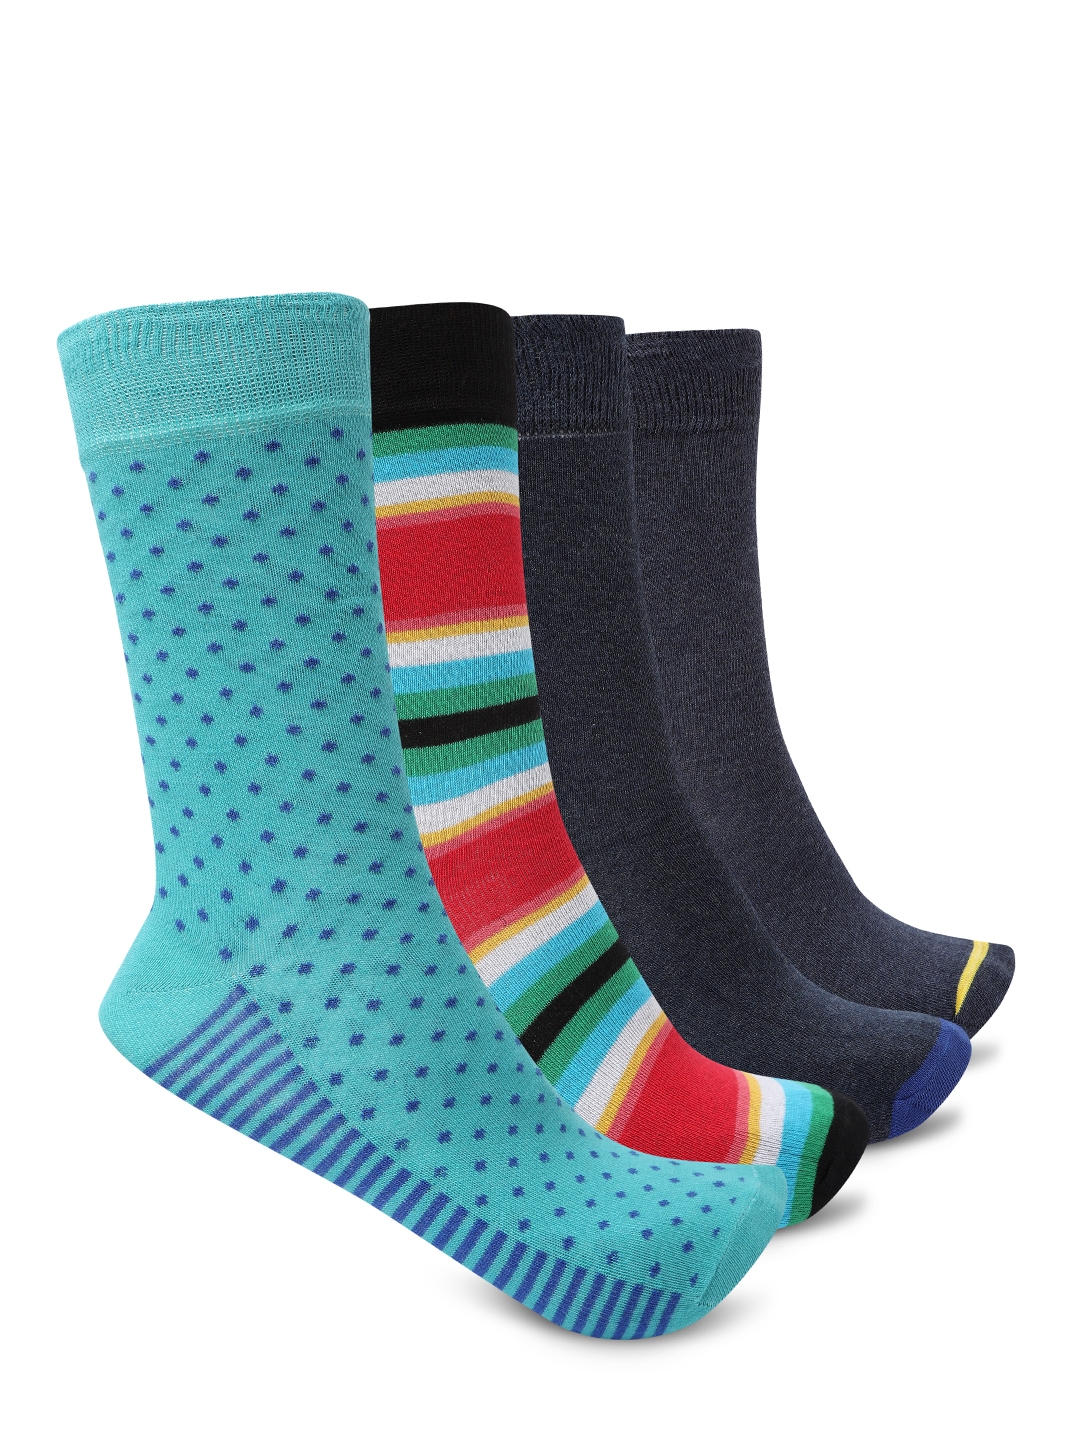 Smarty Pants | Smarty Pants men's pack of 4 solid and printed cotton socks. 